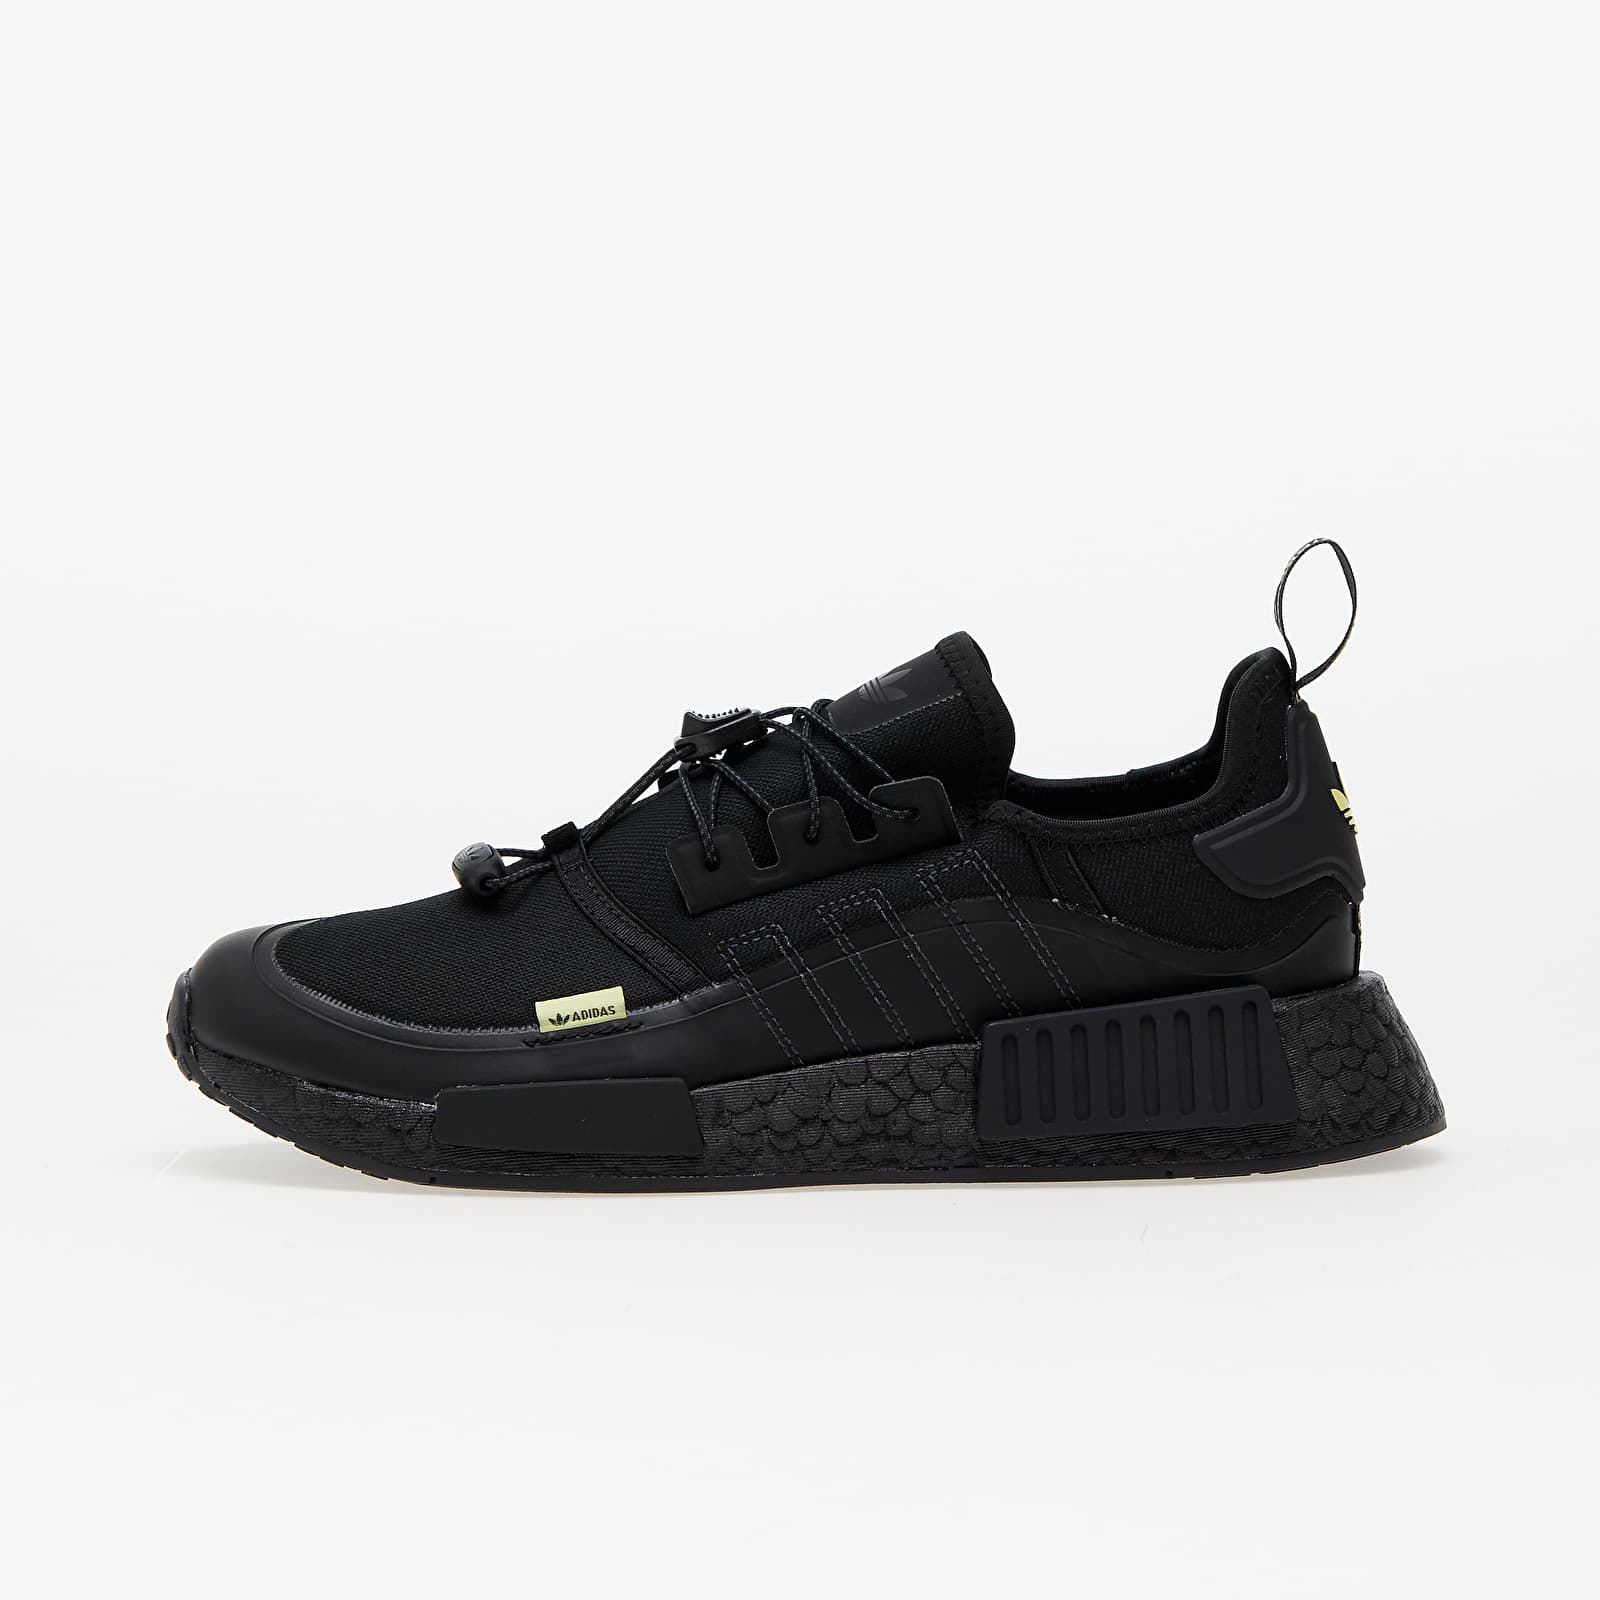 Chaussures et baskets homme adidas NMD_R1 Core Black/ Carbon/ Pulse Yellow